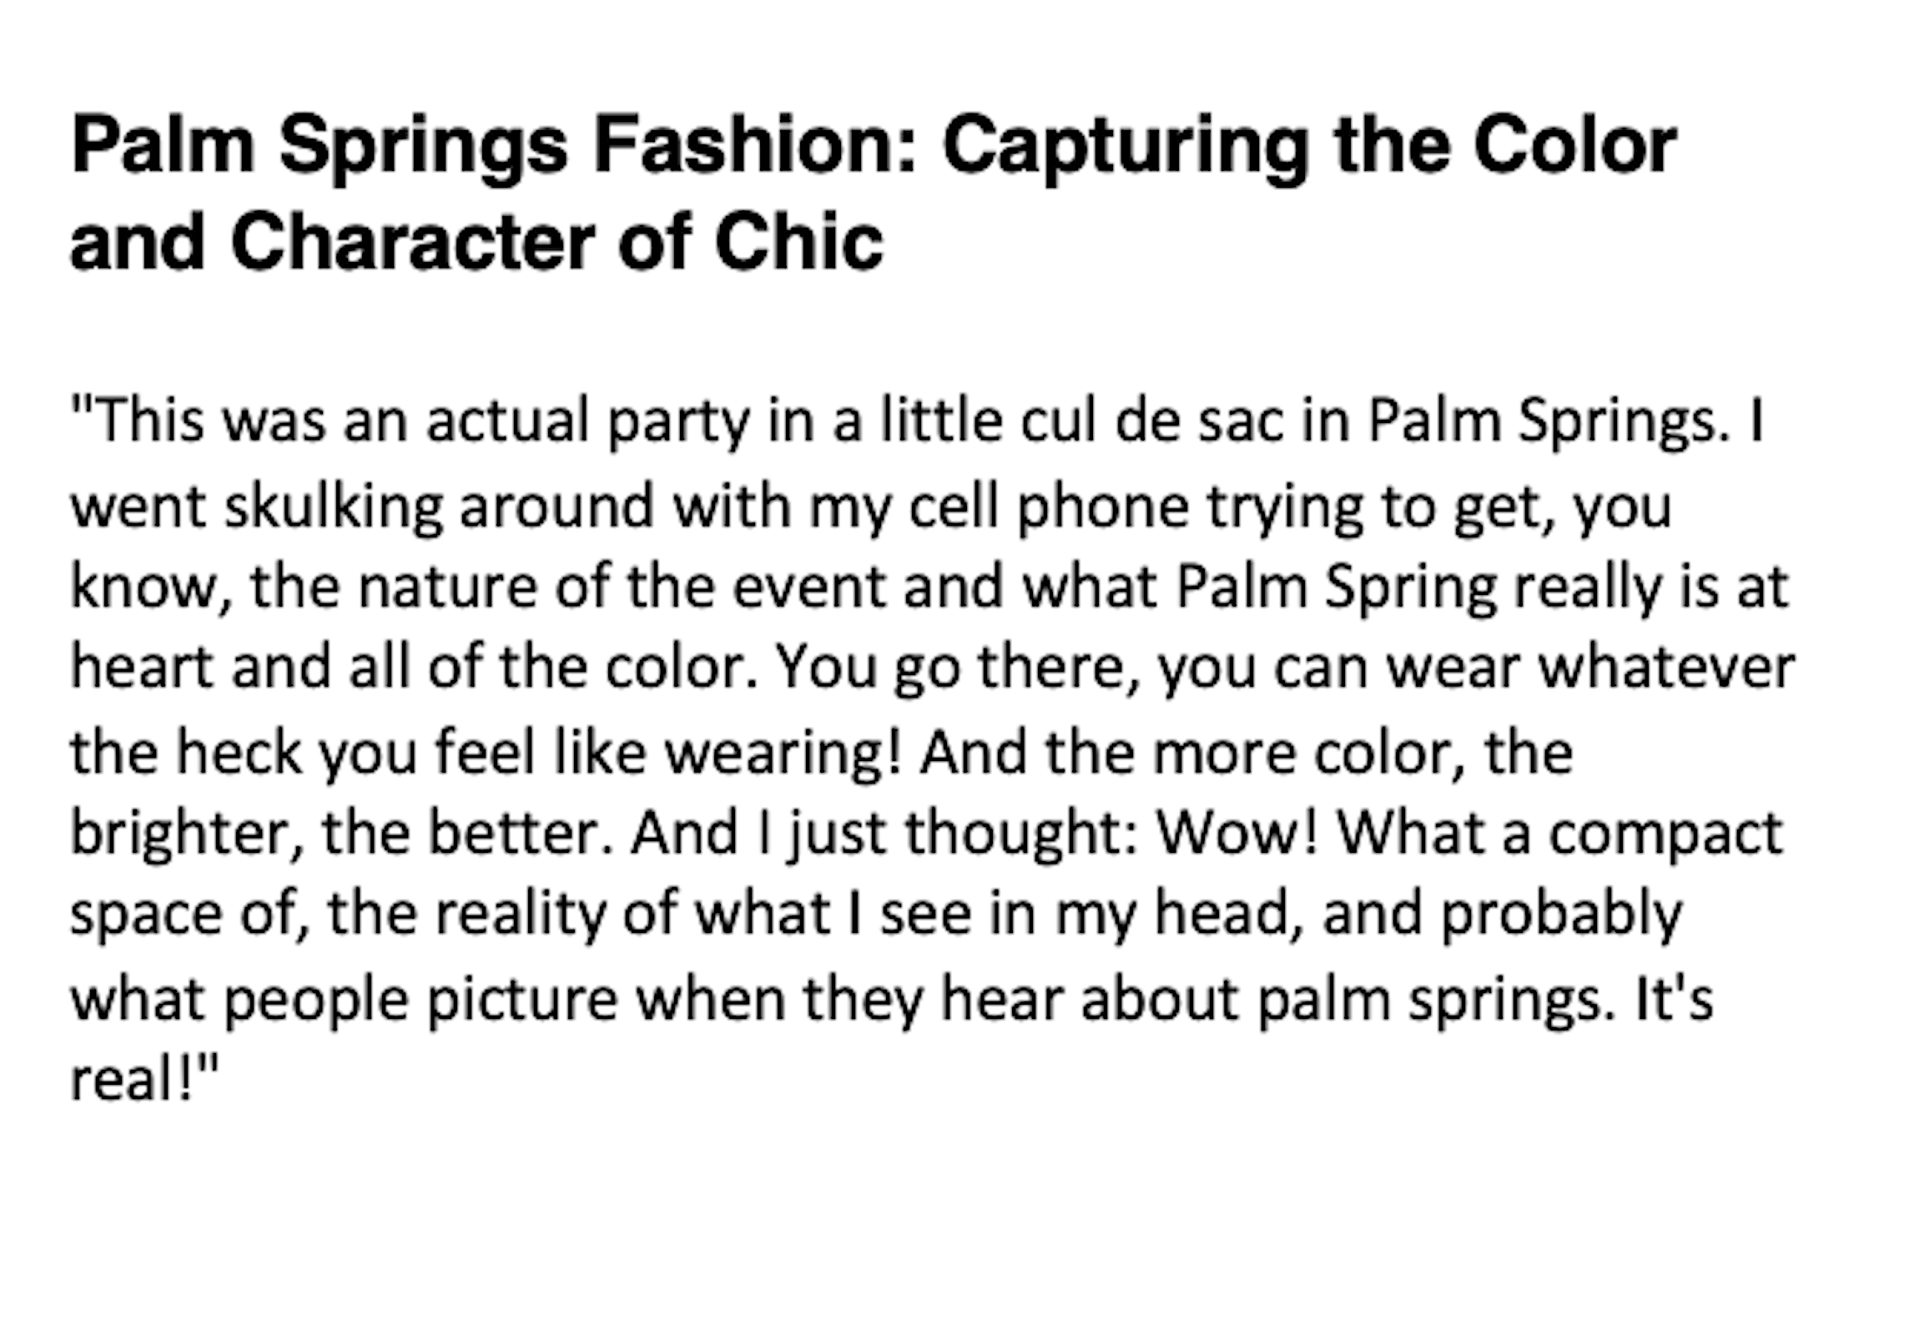 Palm Springs Fashion: Capturing the Color and Character of Chic